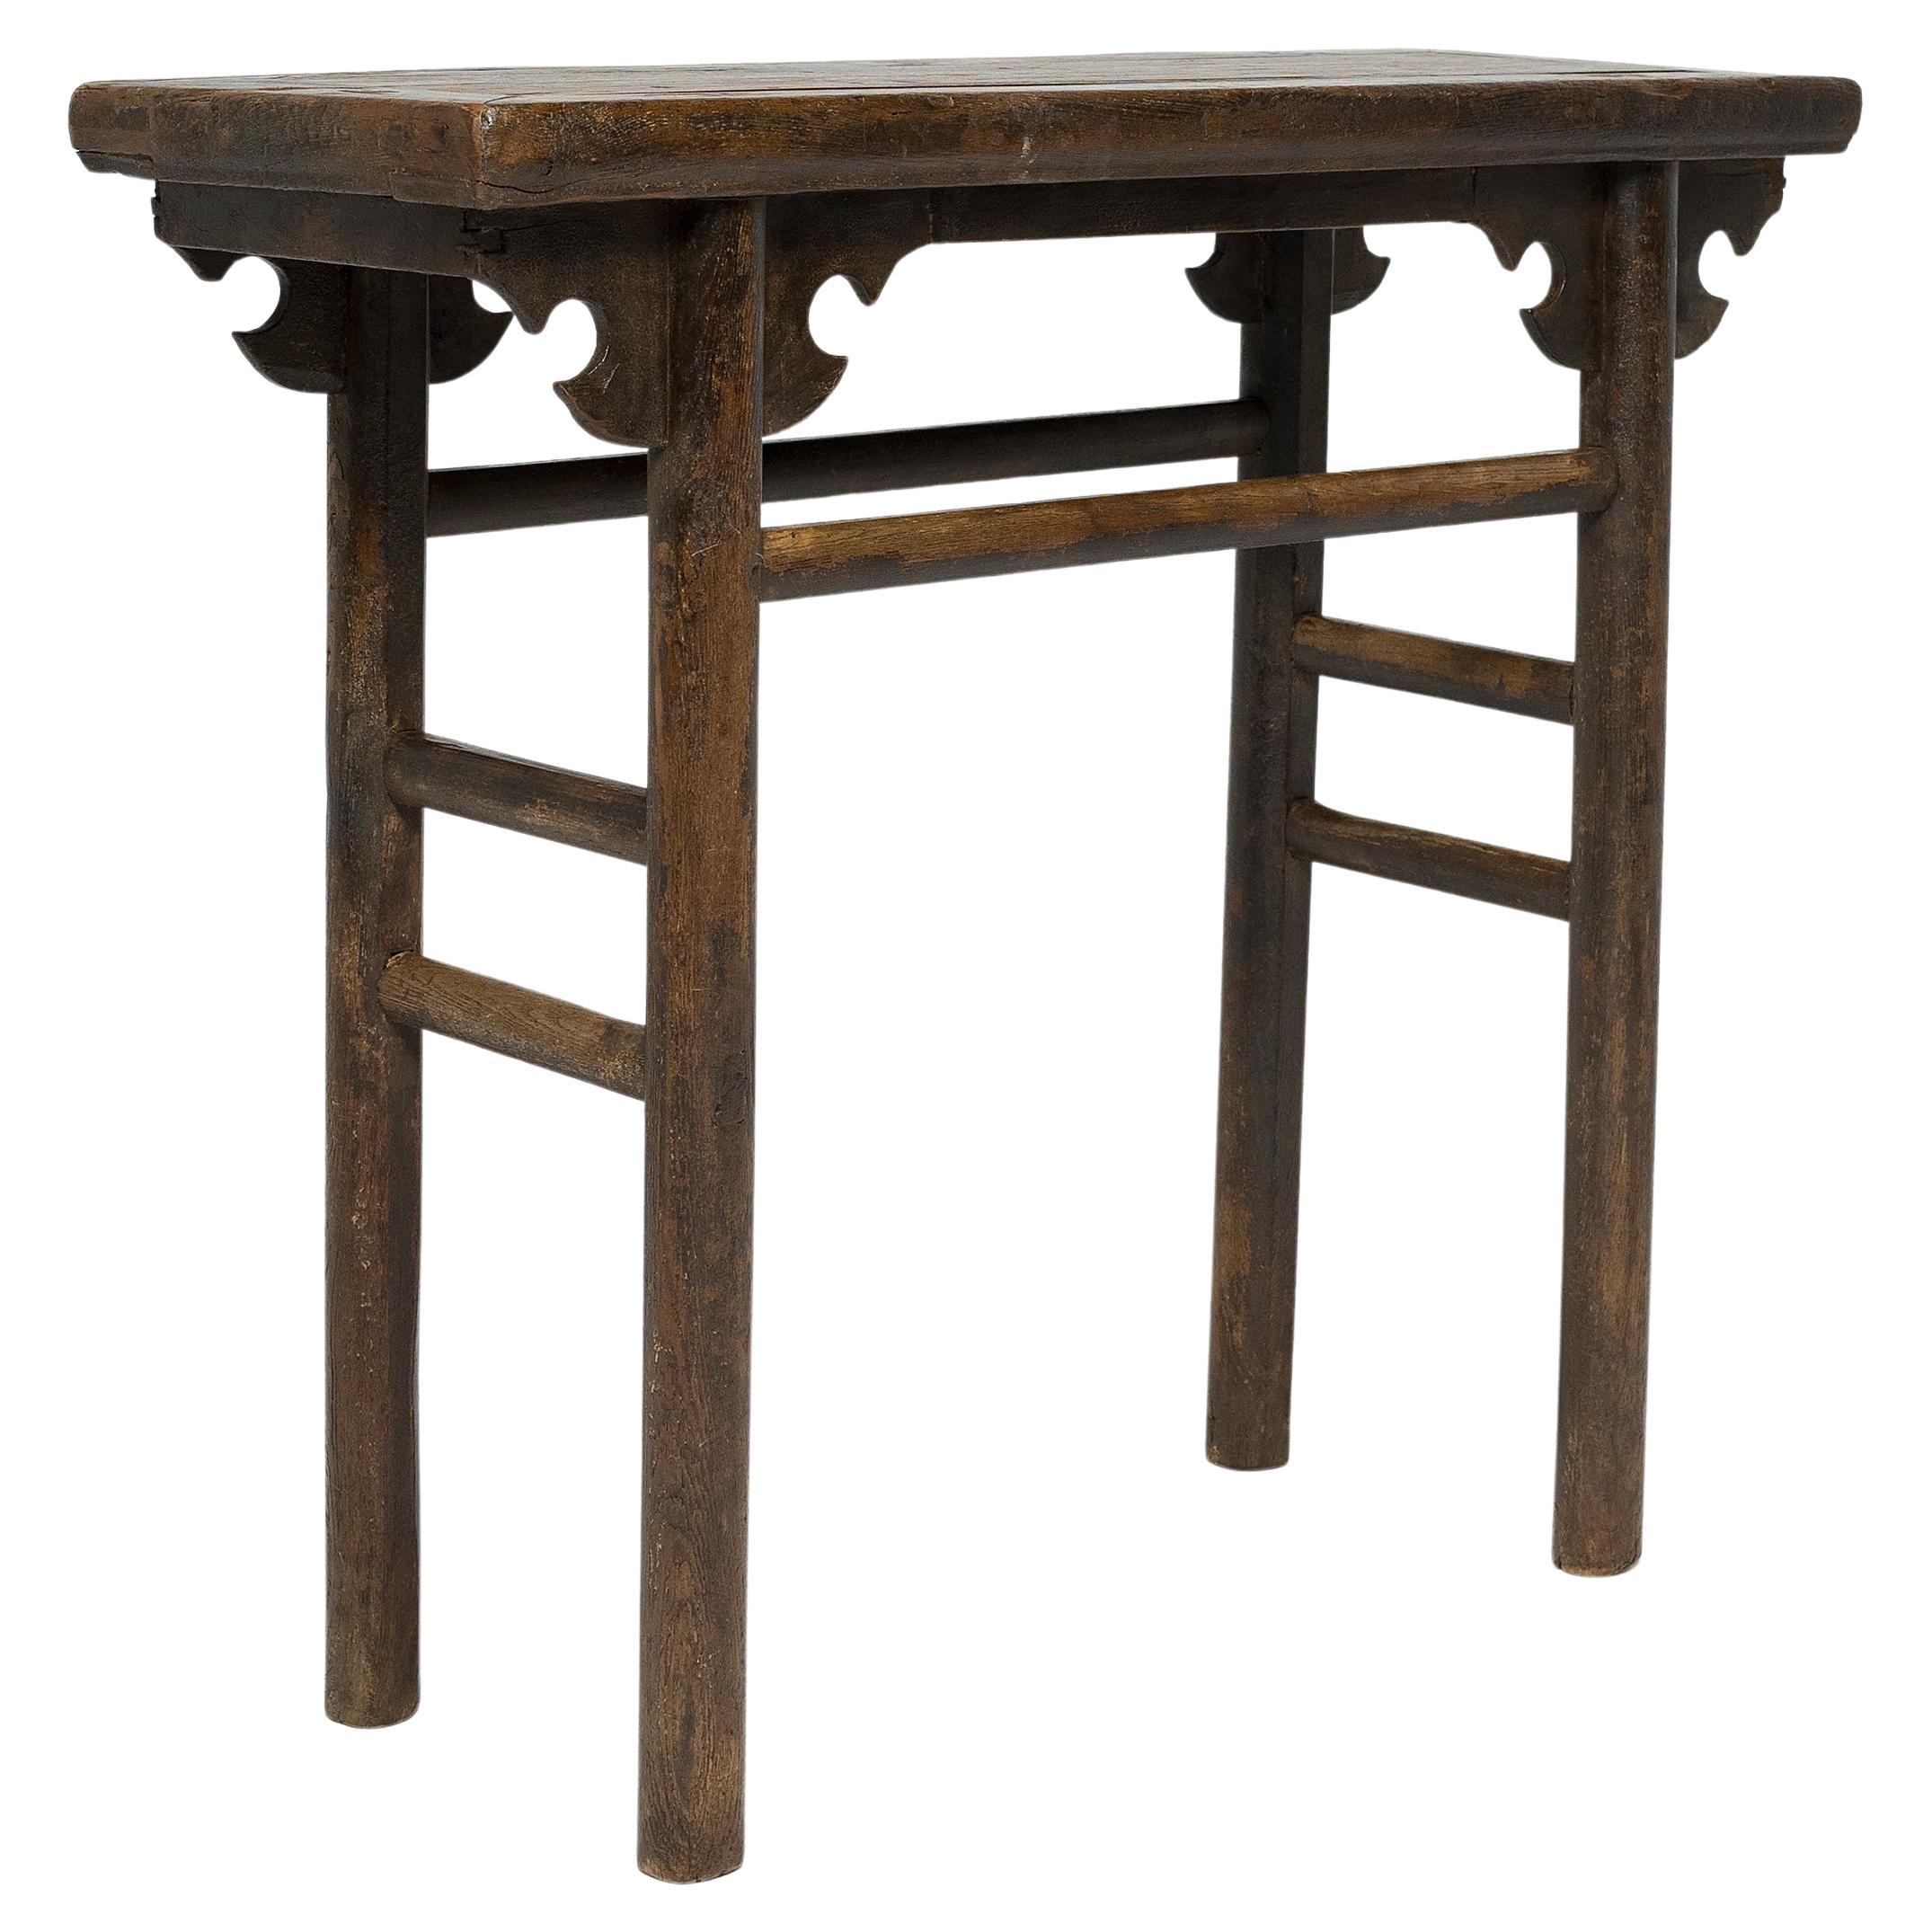 Chinese Shallow Wine Table, circa 1800